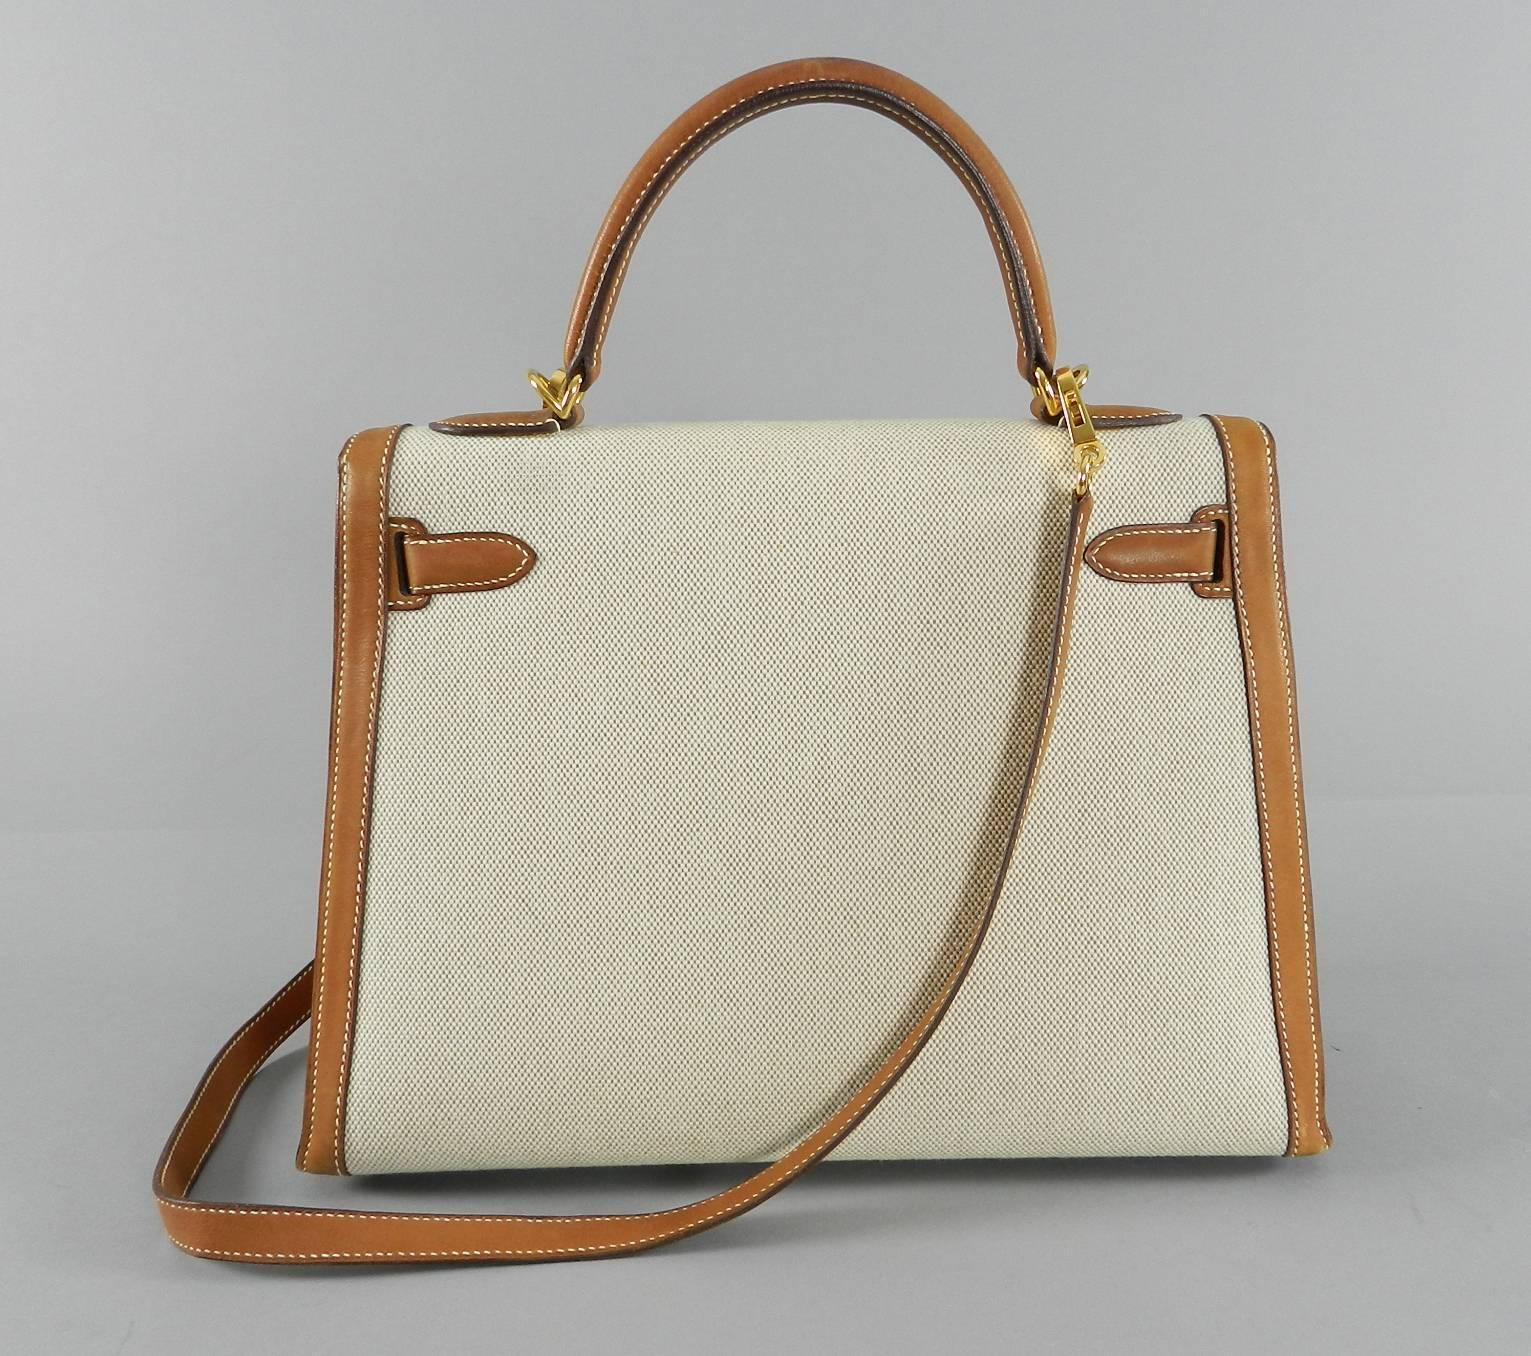 Hermes Kelly 32cm bag in bi-color barenia natural leather and toile canvas. Used only a few times. Excellent pre-owned condition with some darkening to top handle as pictured, but overall excellent condition. Comes with clochette, clochette duster,